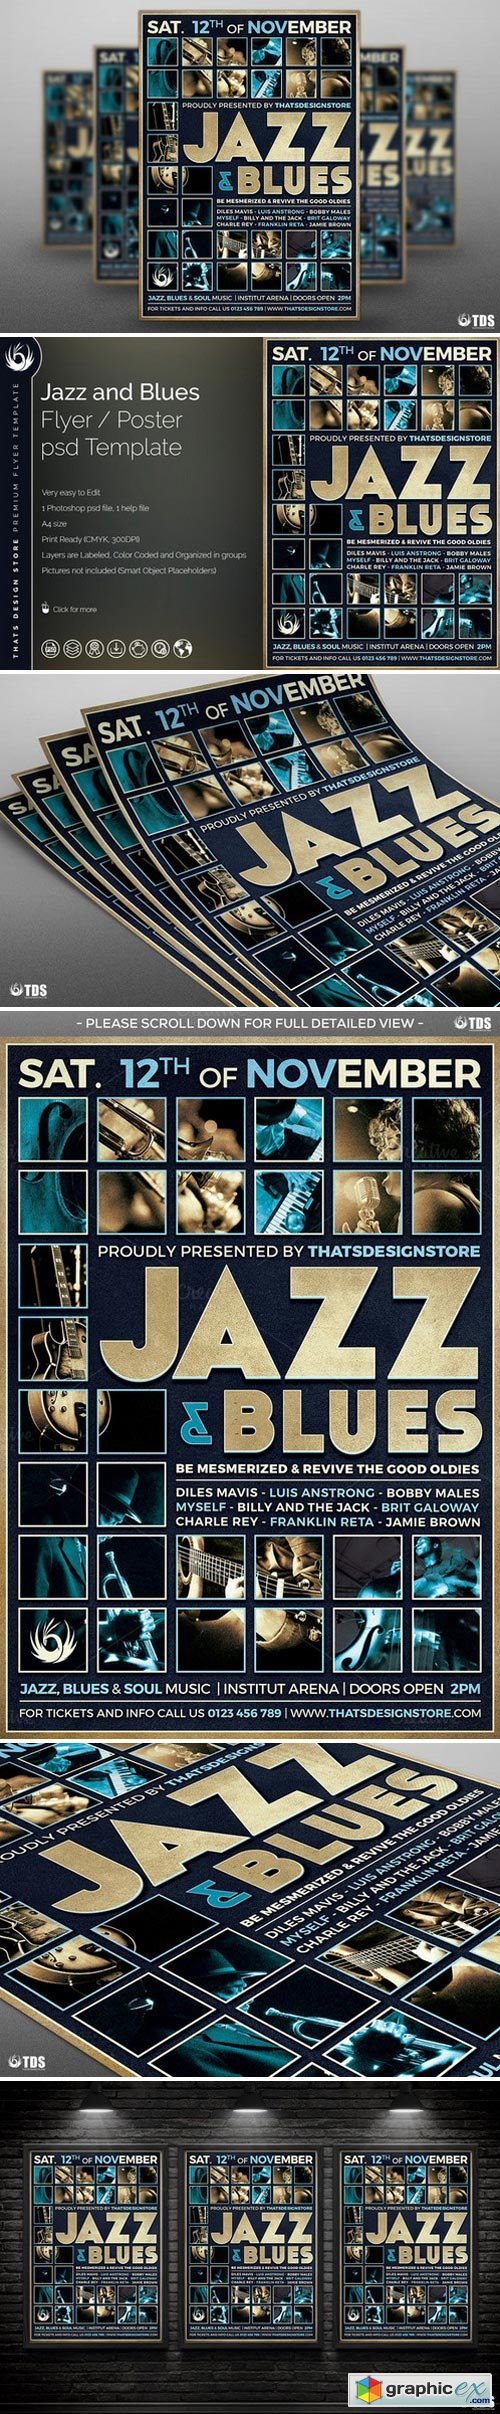 Jazz and Blues Flyer Template